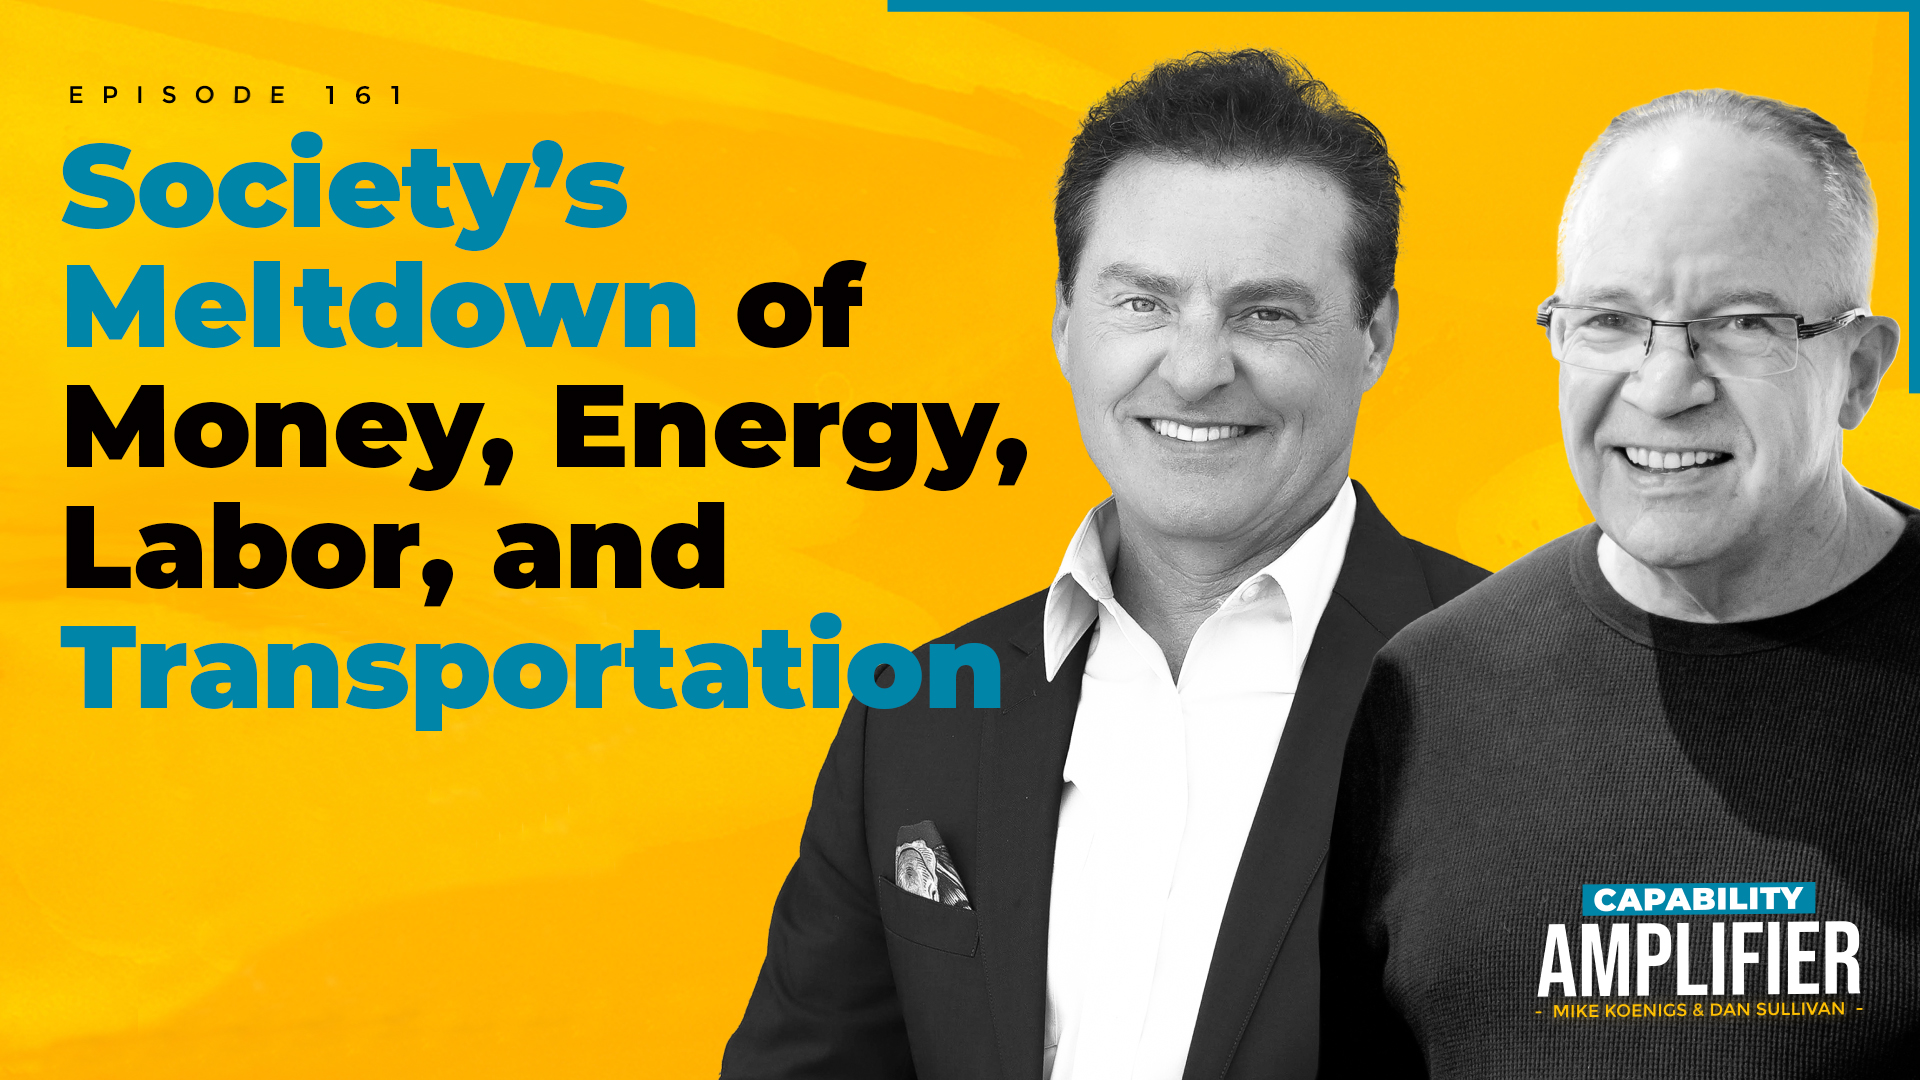 Episode 161 Art: Text reading "Society’s Meltdown of Money, Energy, Labor, and Transportation" on a yellow background with photos of Mike Koenigs and Dan Sullivan.